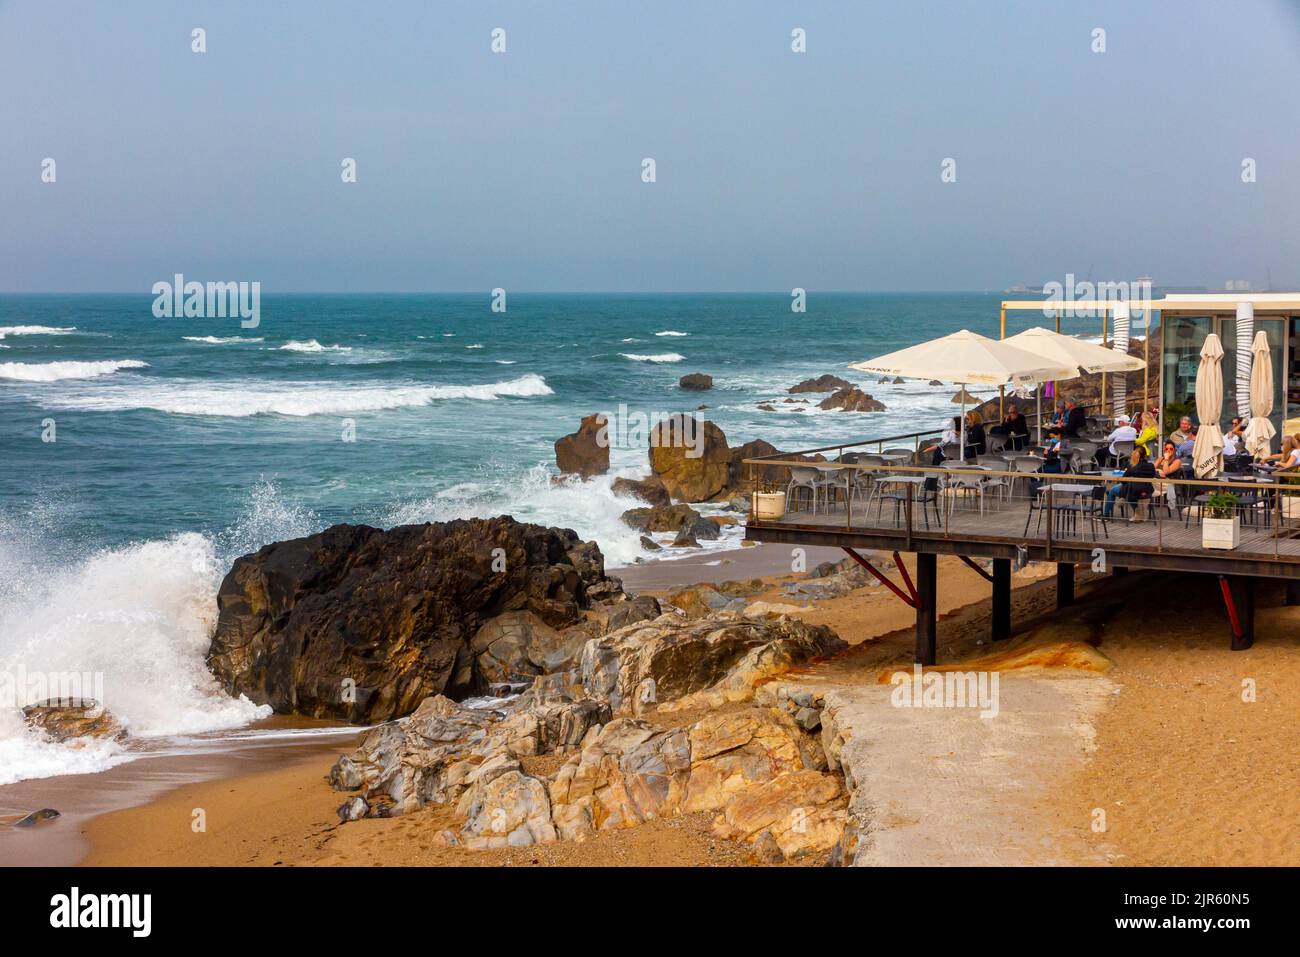 Waves crashing on a beach near a cafe and bar on the Atlantic coast at Foz do Douro near Porto in northern Portugal. Stock Photo